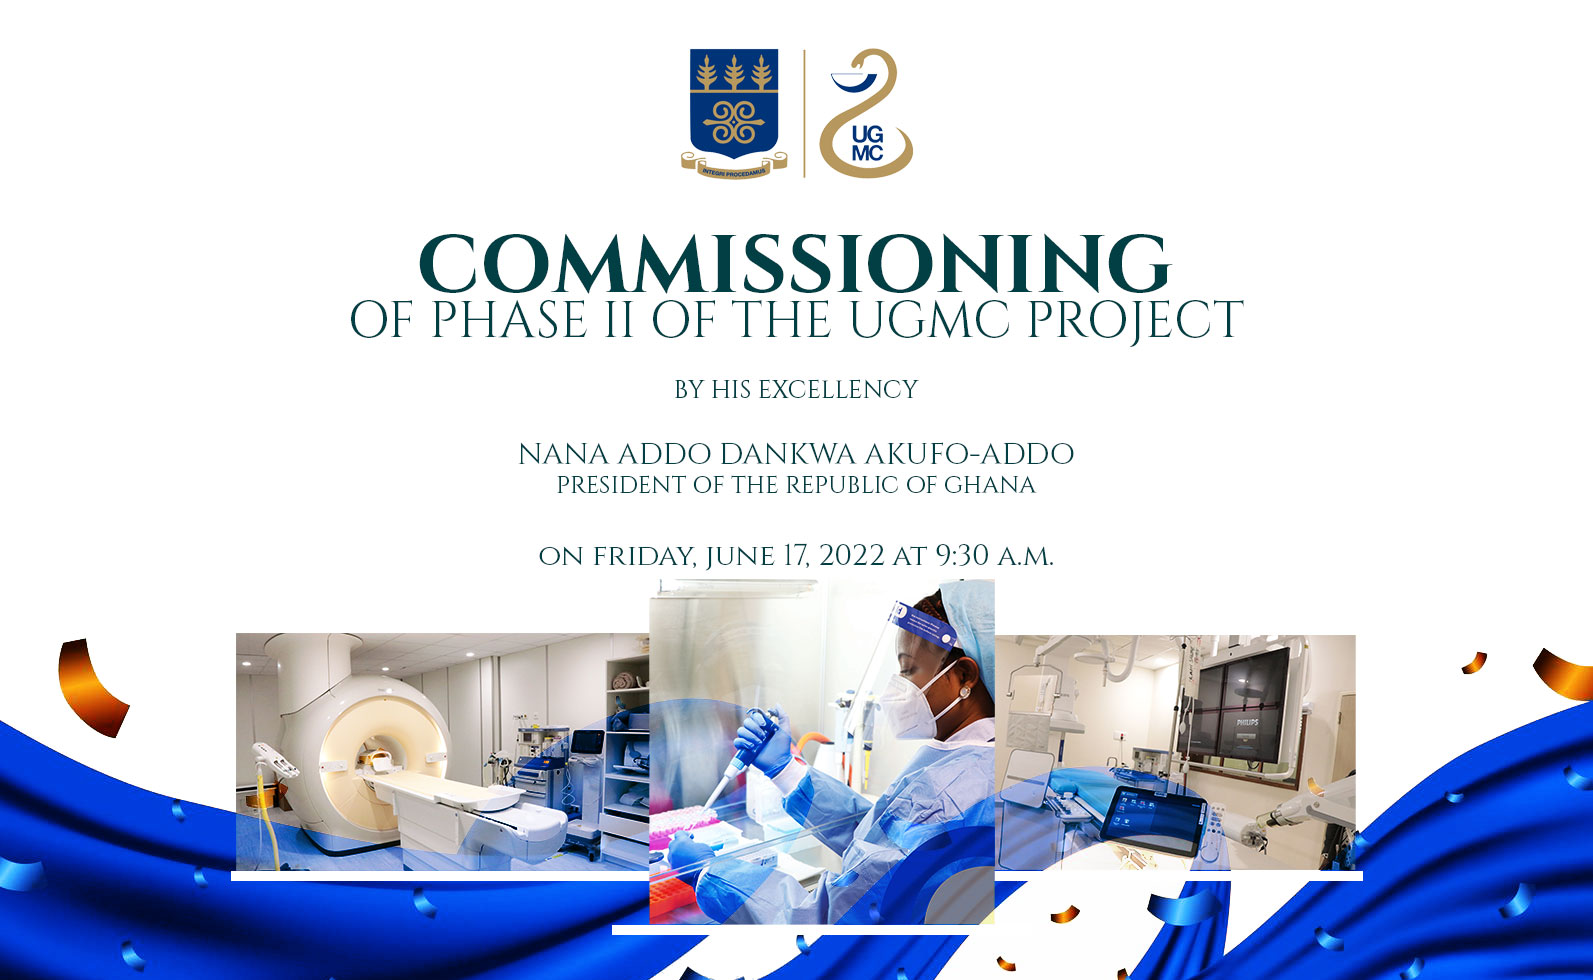 Commissioning of Phase II of the UGMC Project